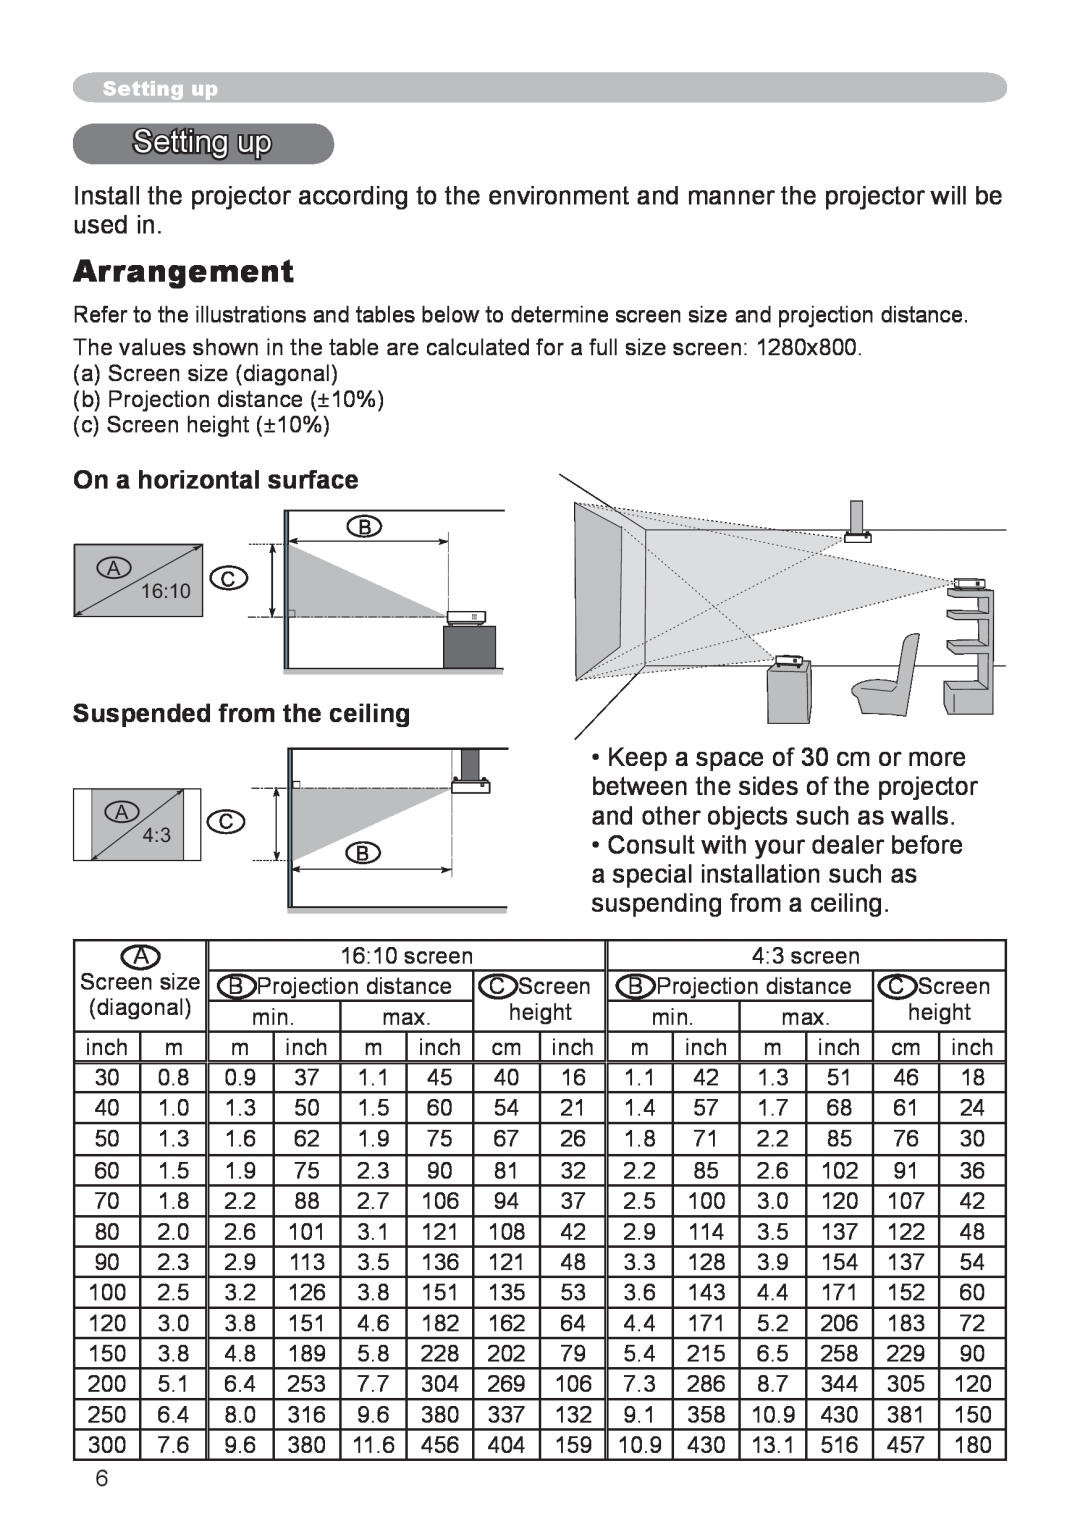 Dukane 8783 user manual Setting up, Arrangement, On a horizontal surface, Suspended from the ceiling 